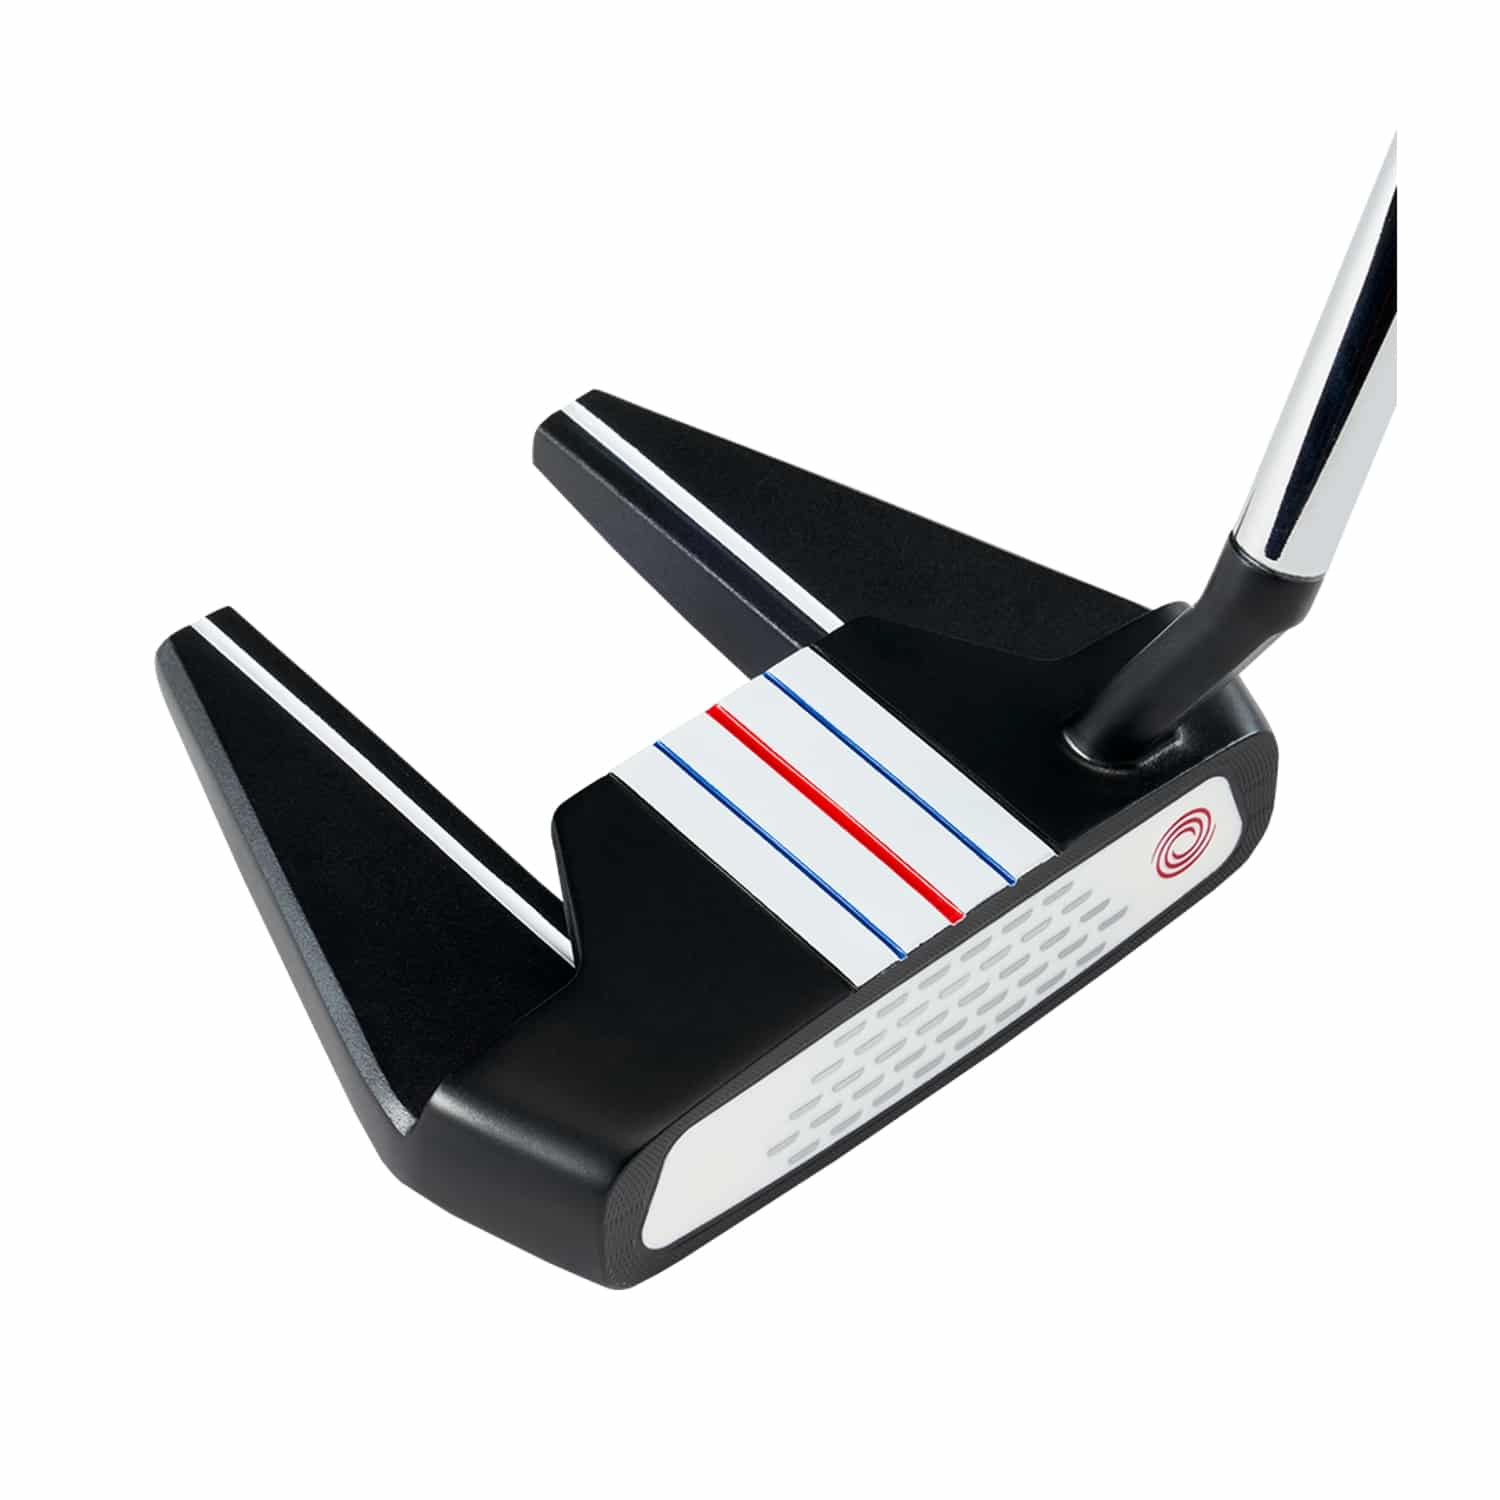 odyssey putters